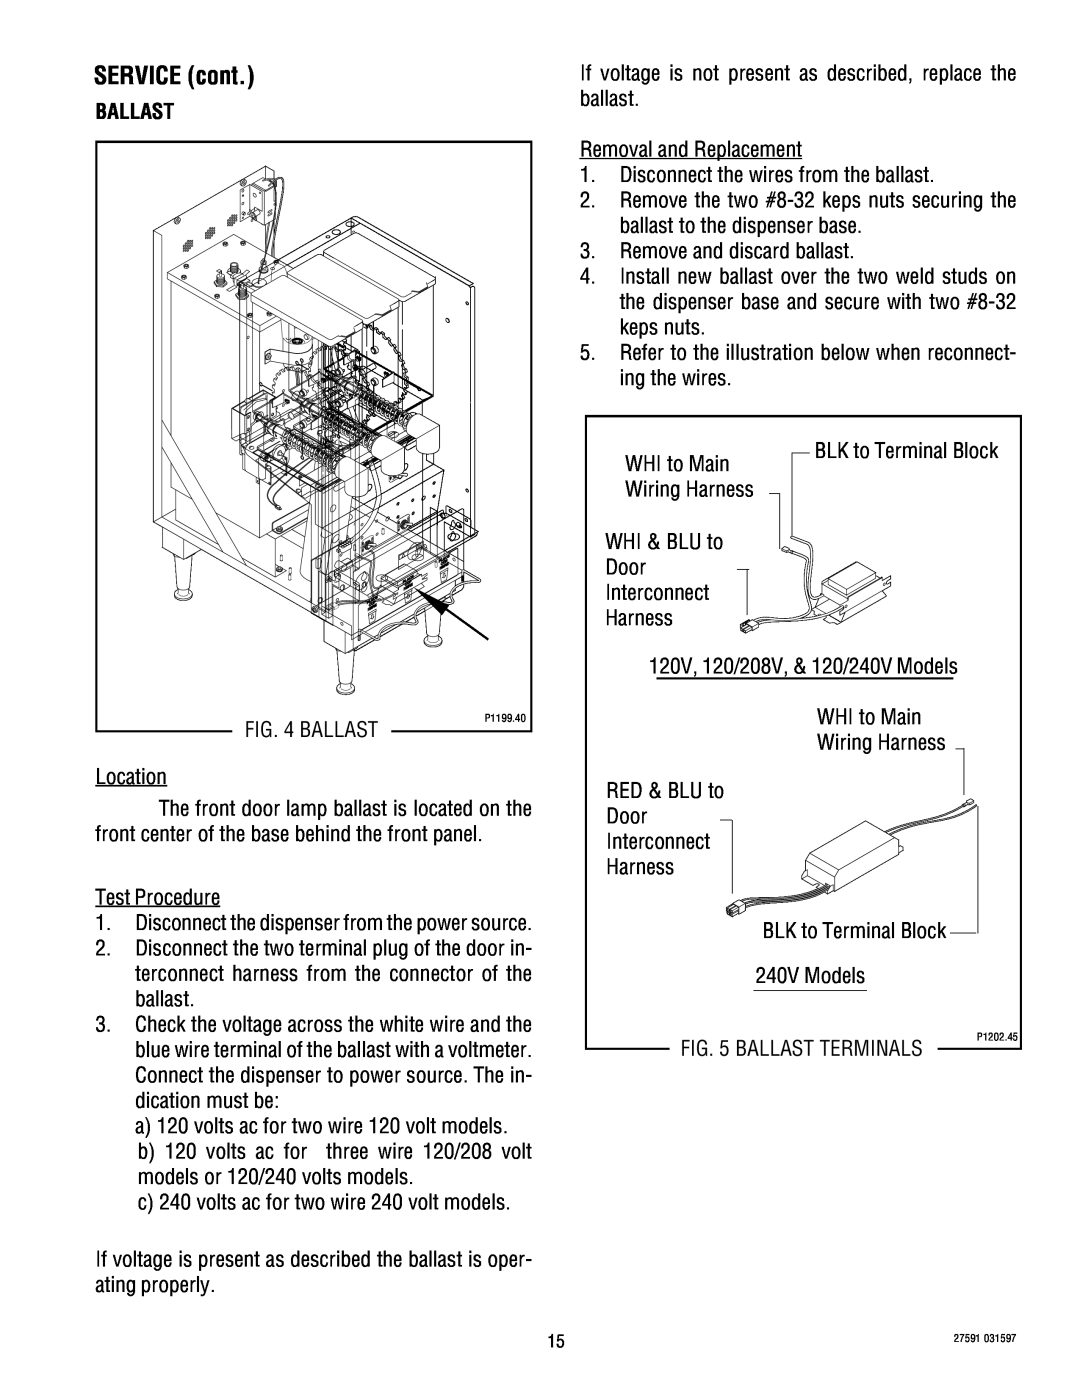 Bunn HC-3 service manual Ballast, SERVICE cont, Disconnect the dispenser from the power source, BLK to Terminal Block 